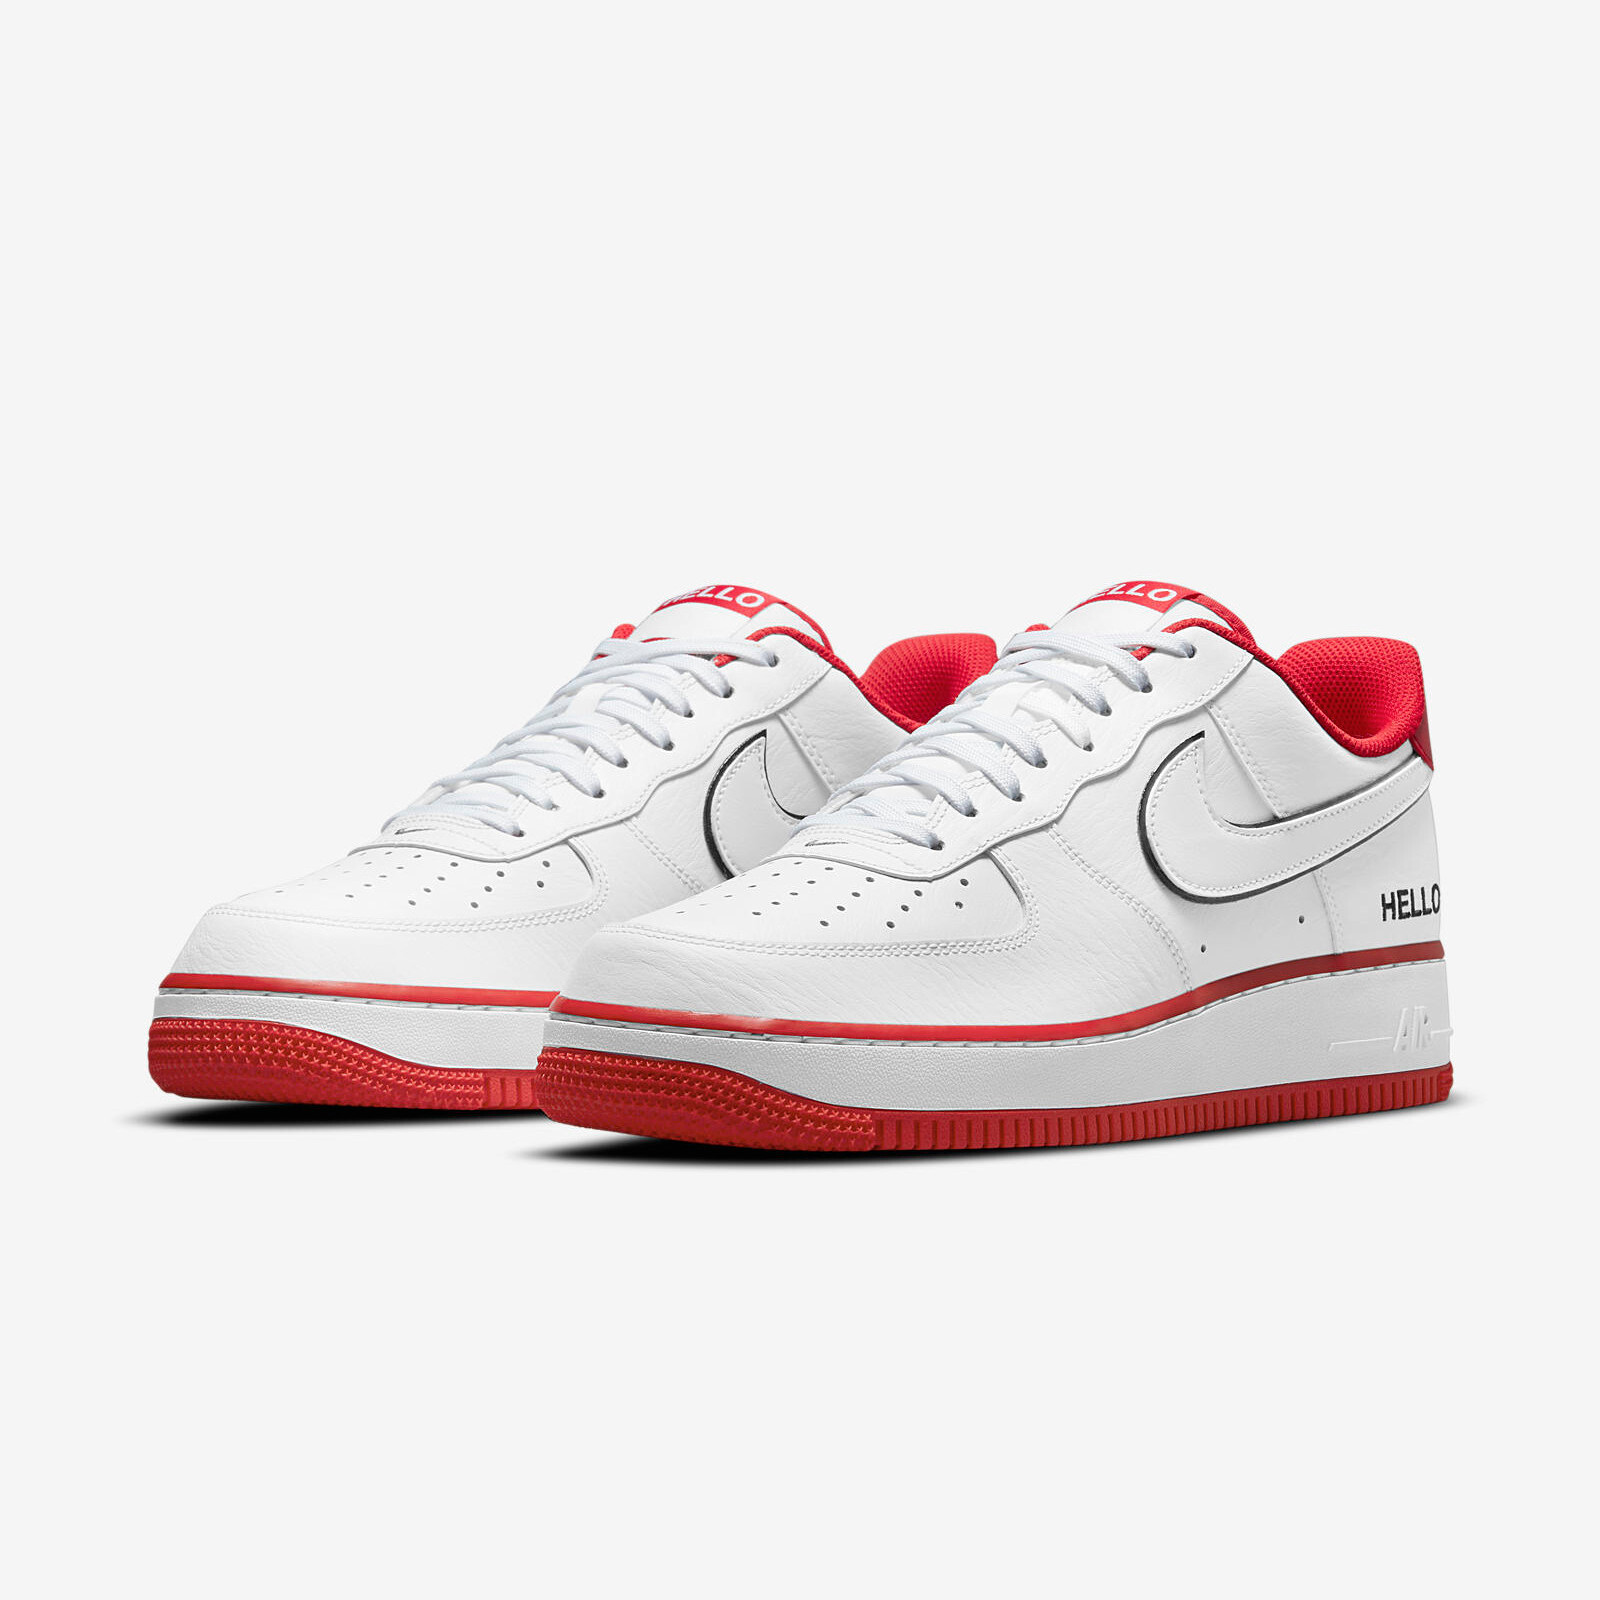 Nike Air Force 1 Hello
White / Red